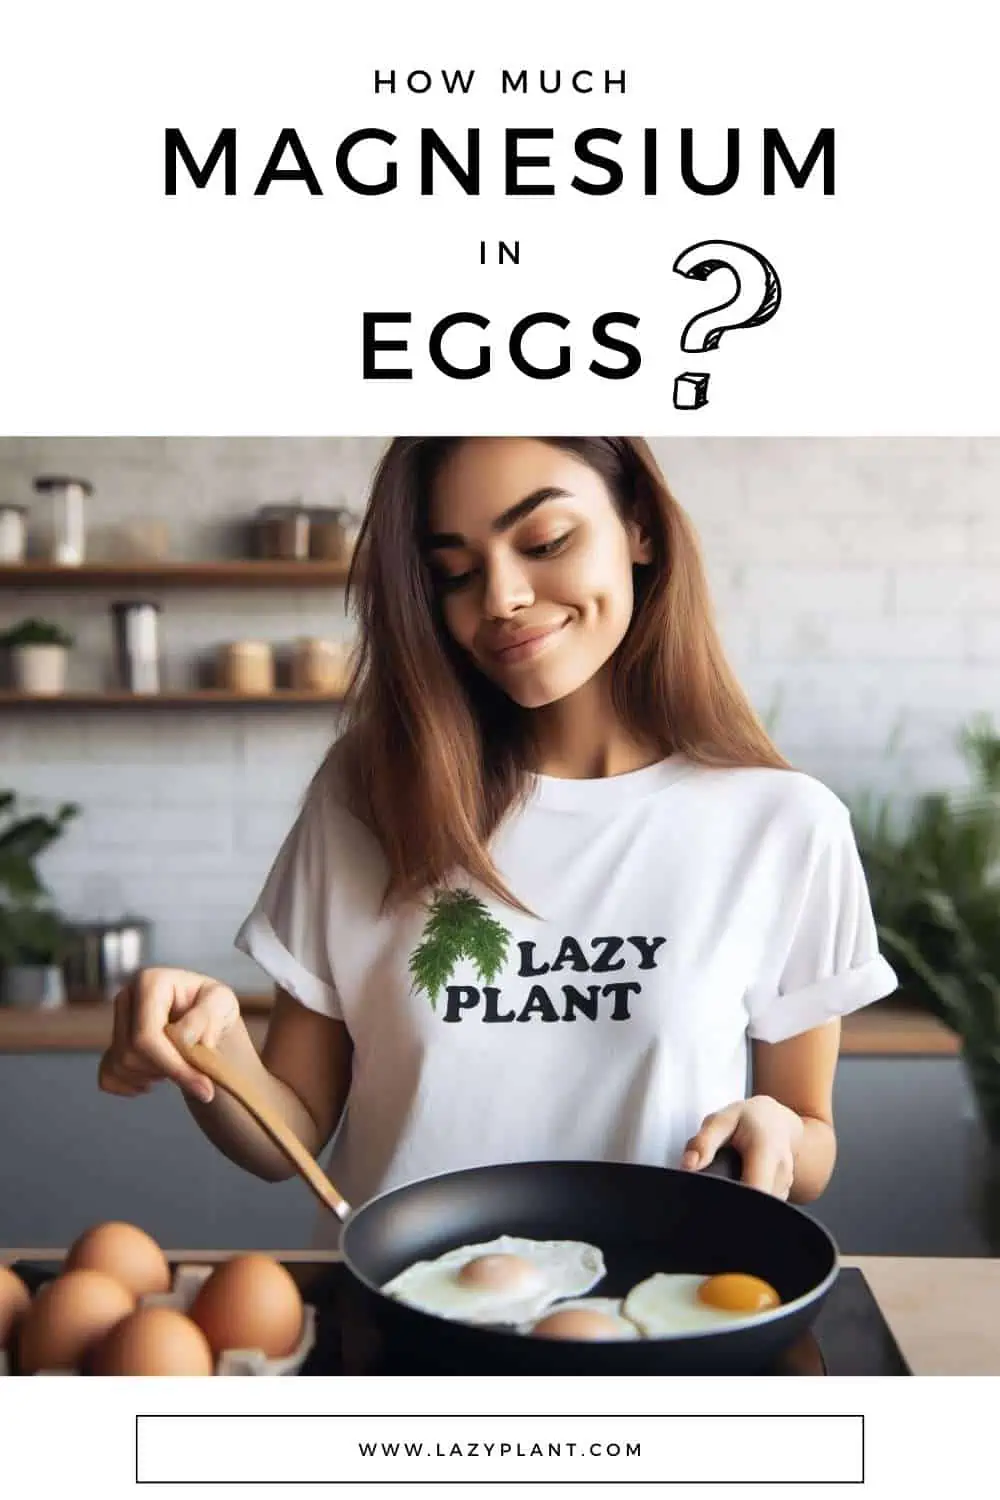 How much magnesium is in eggs?